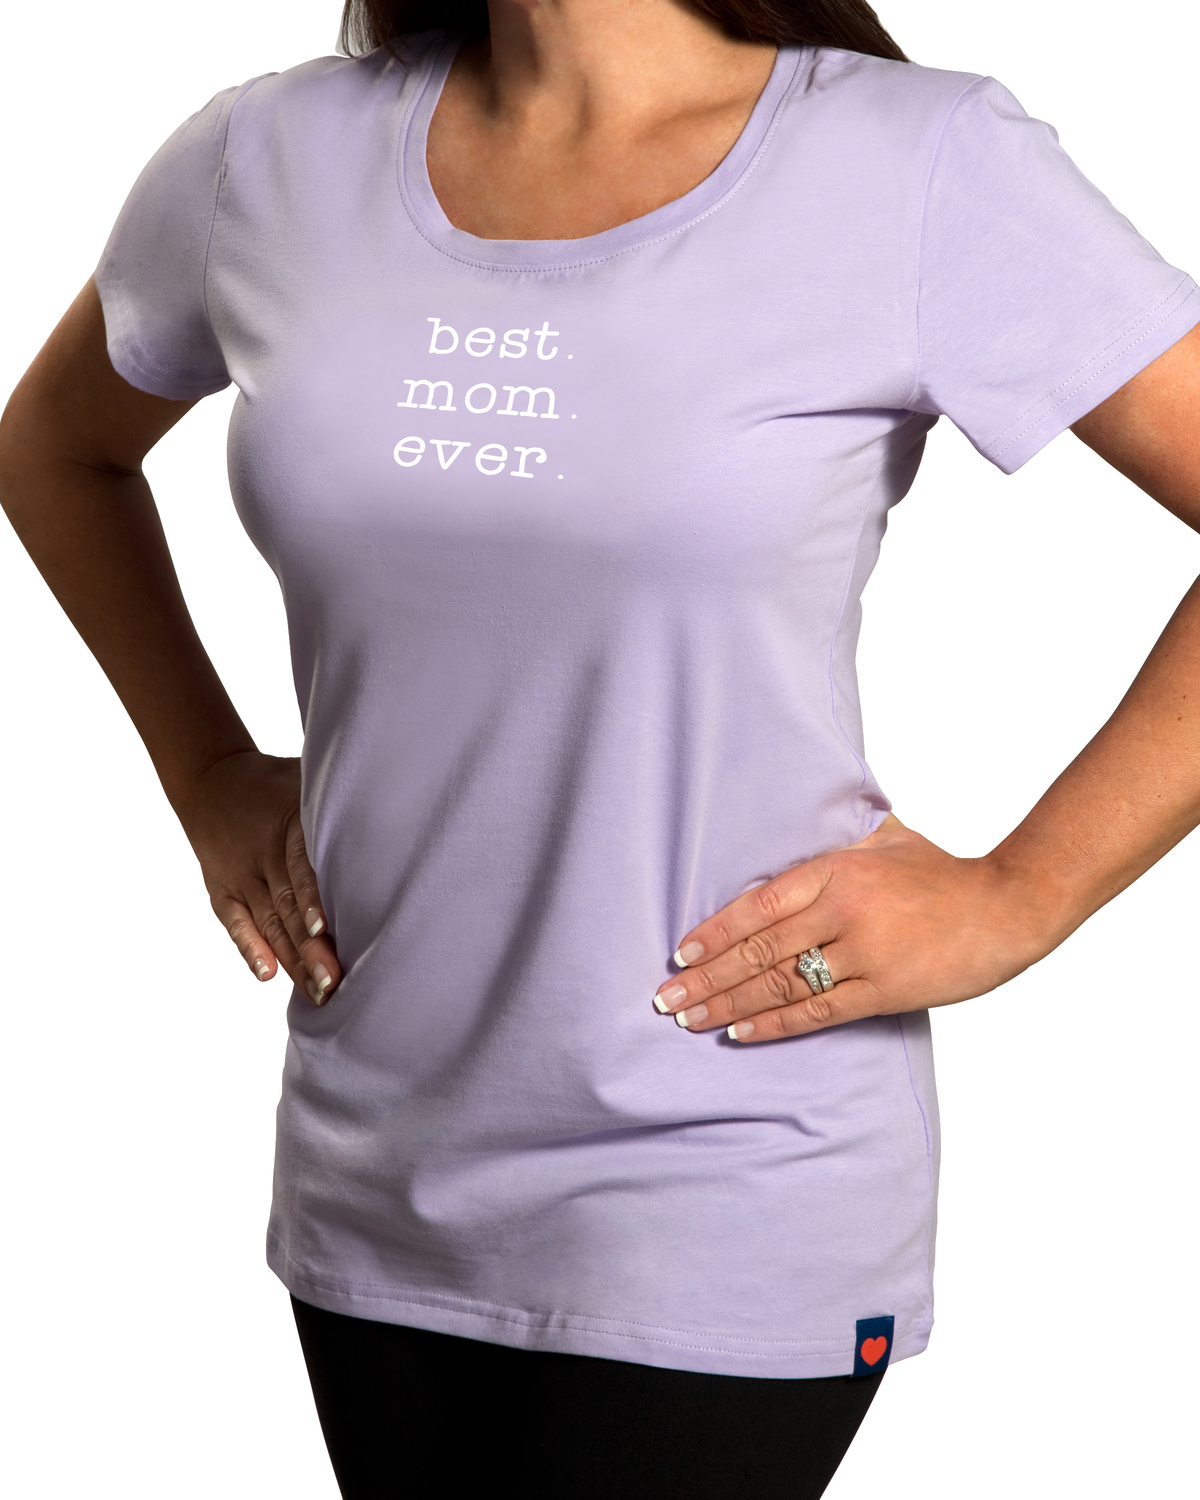 Best Mom by Mom Love - Best Mom - Small Purple T-Shirt